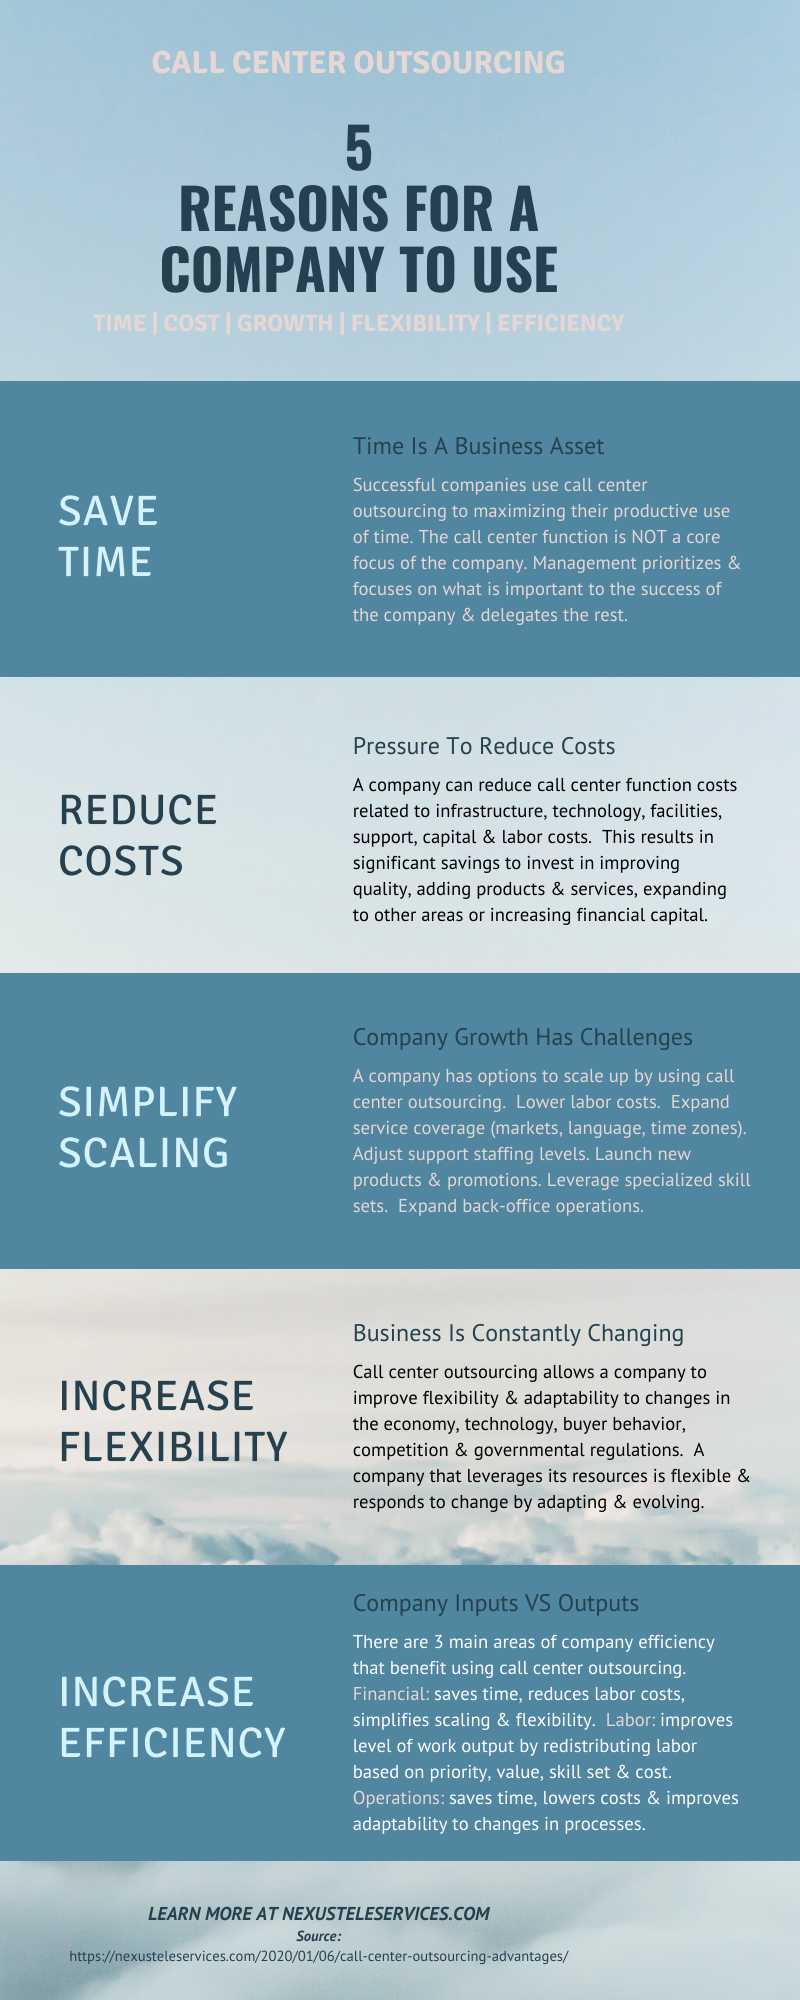 Call Center Outsourcing Advantages Infographic